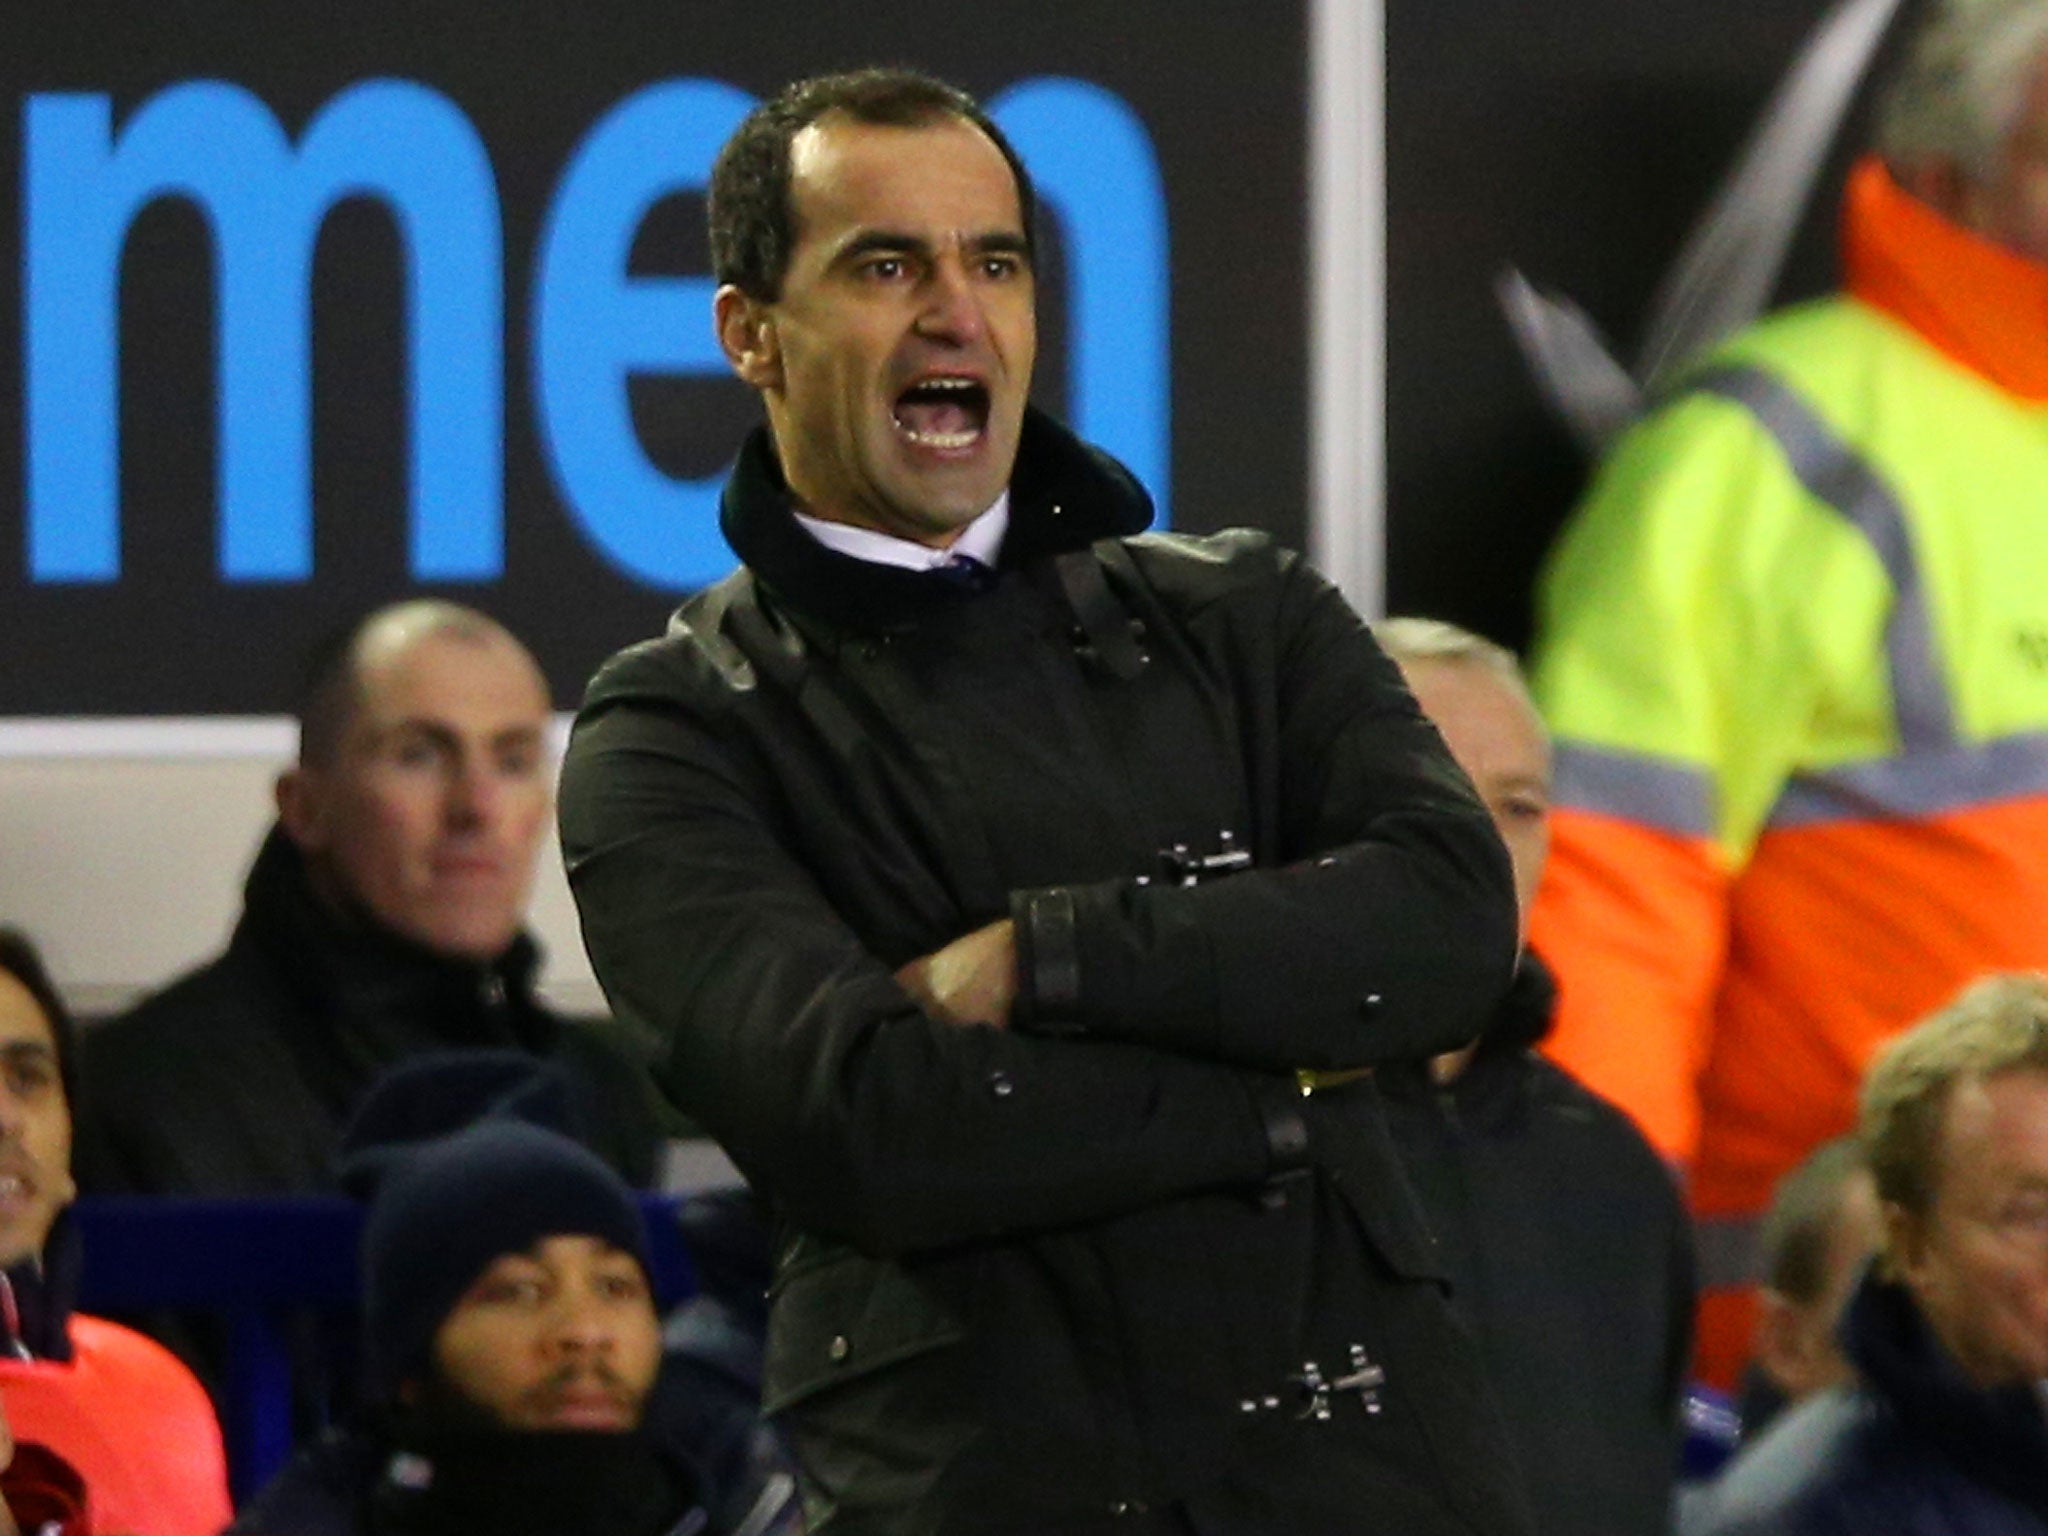 Roberto Martinez feels a winter World Cup in 2022 would be very hard for players to cope with mentally